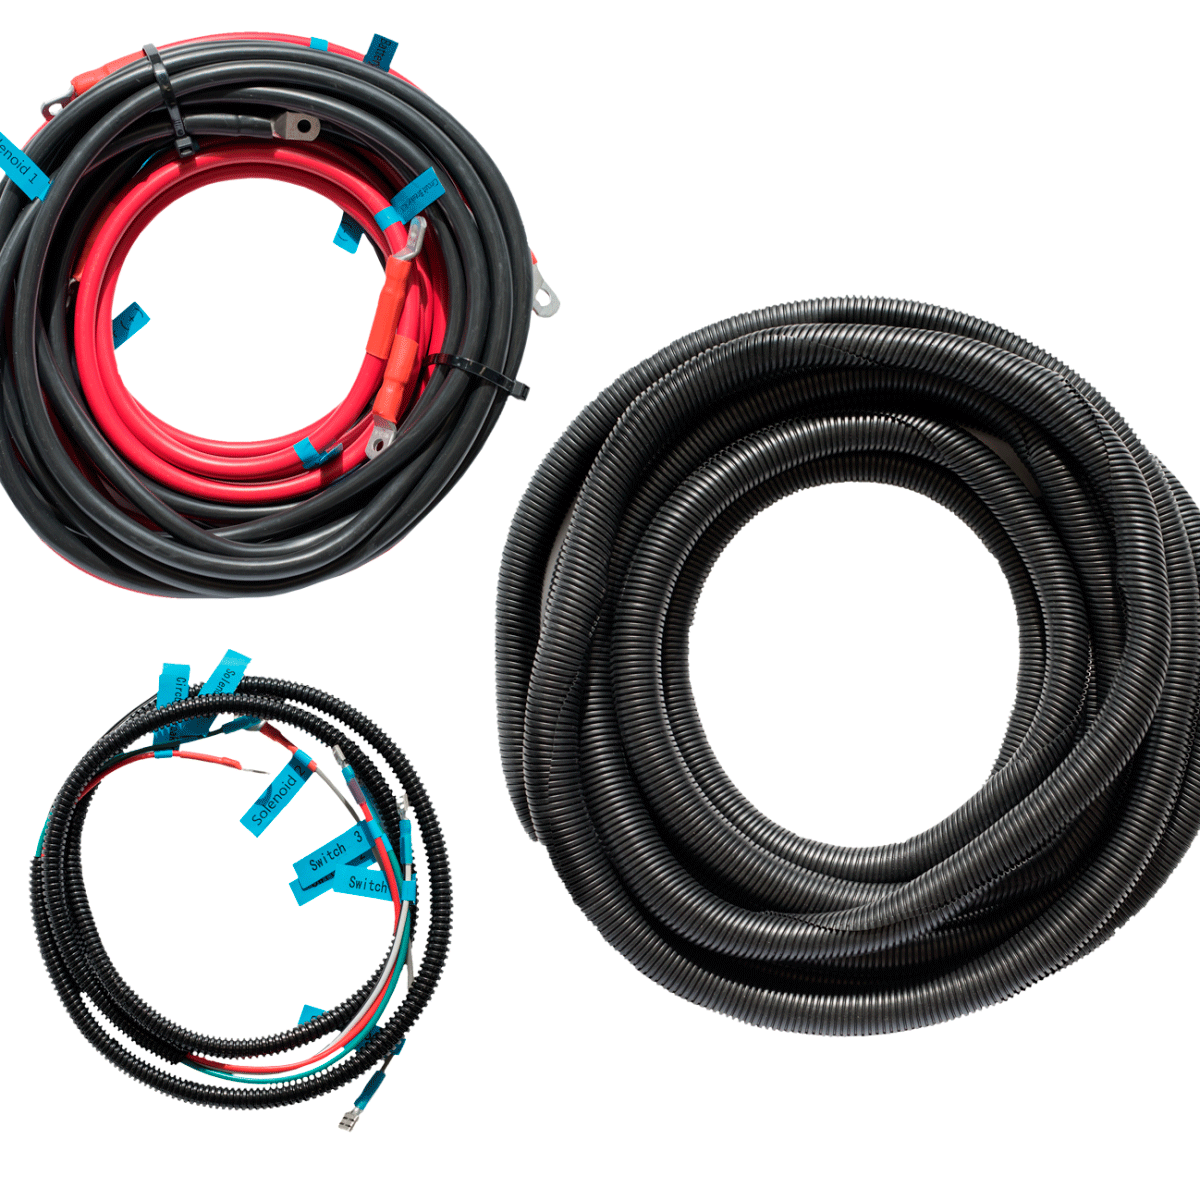 VIPER WIRING LOOM for boats up to 8m